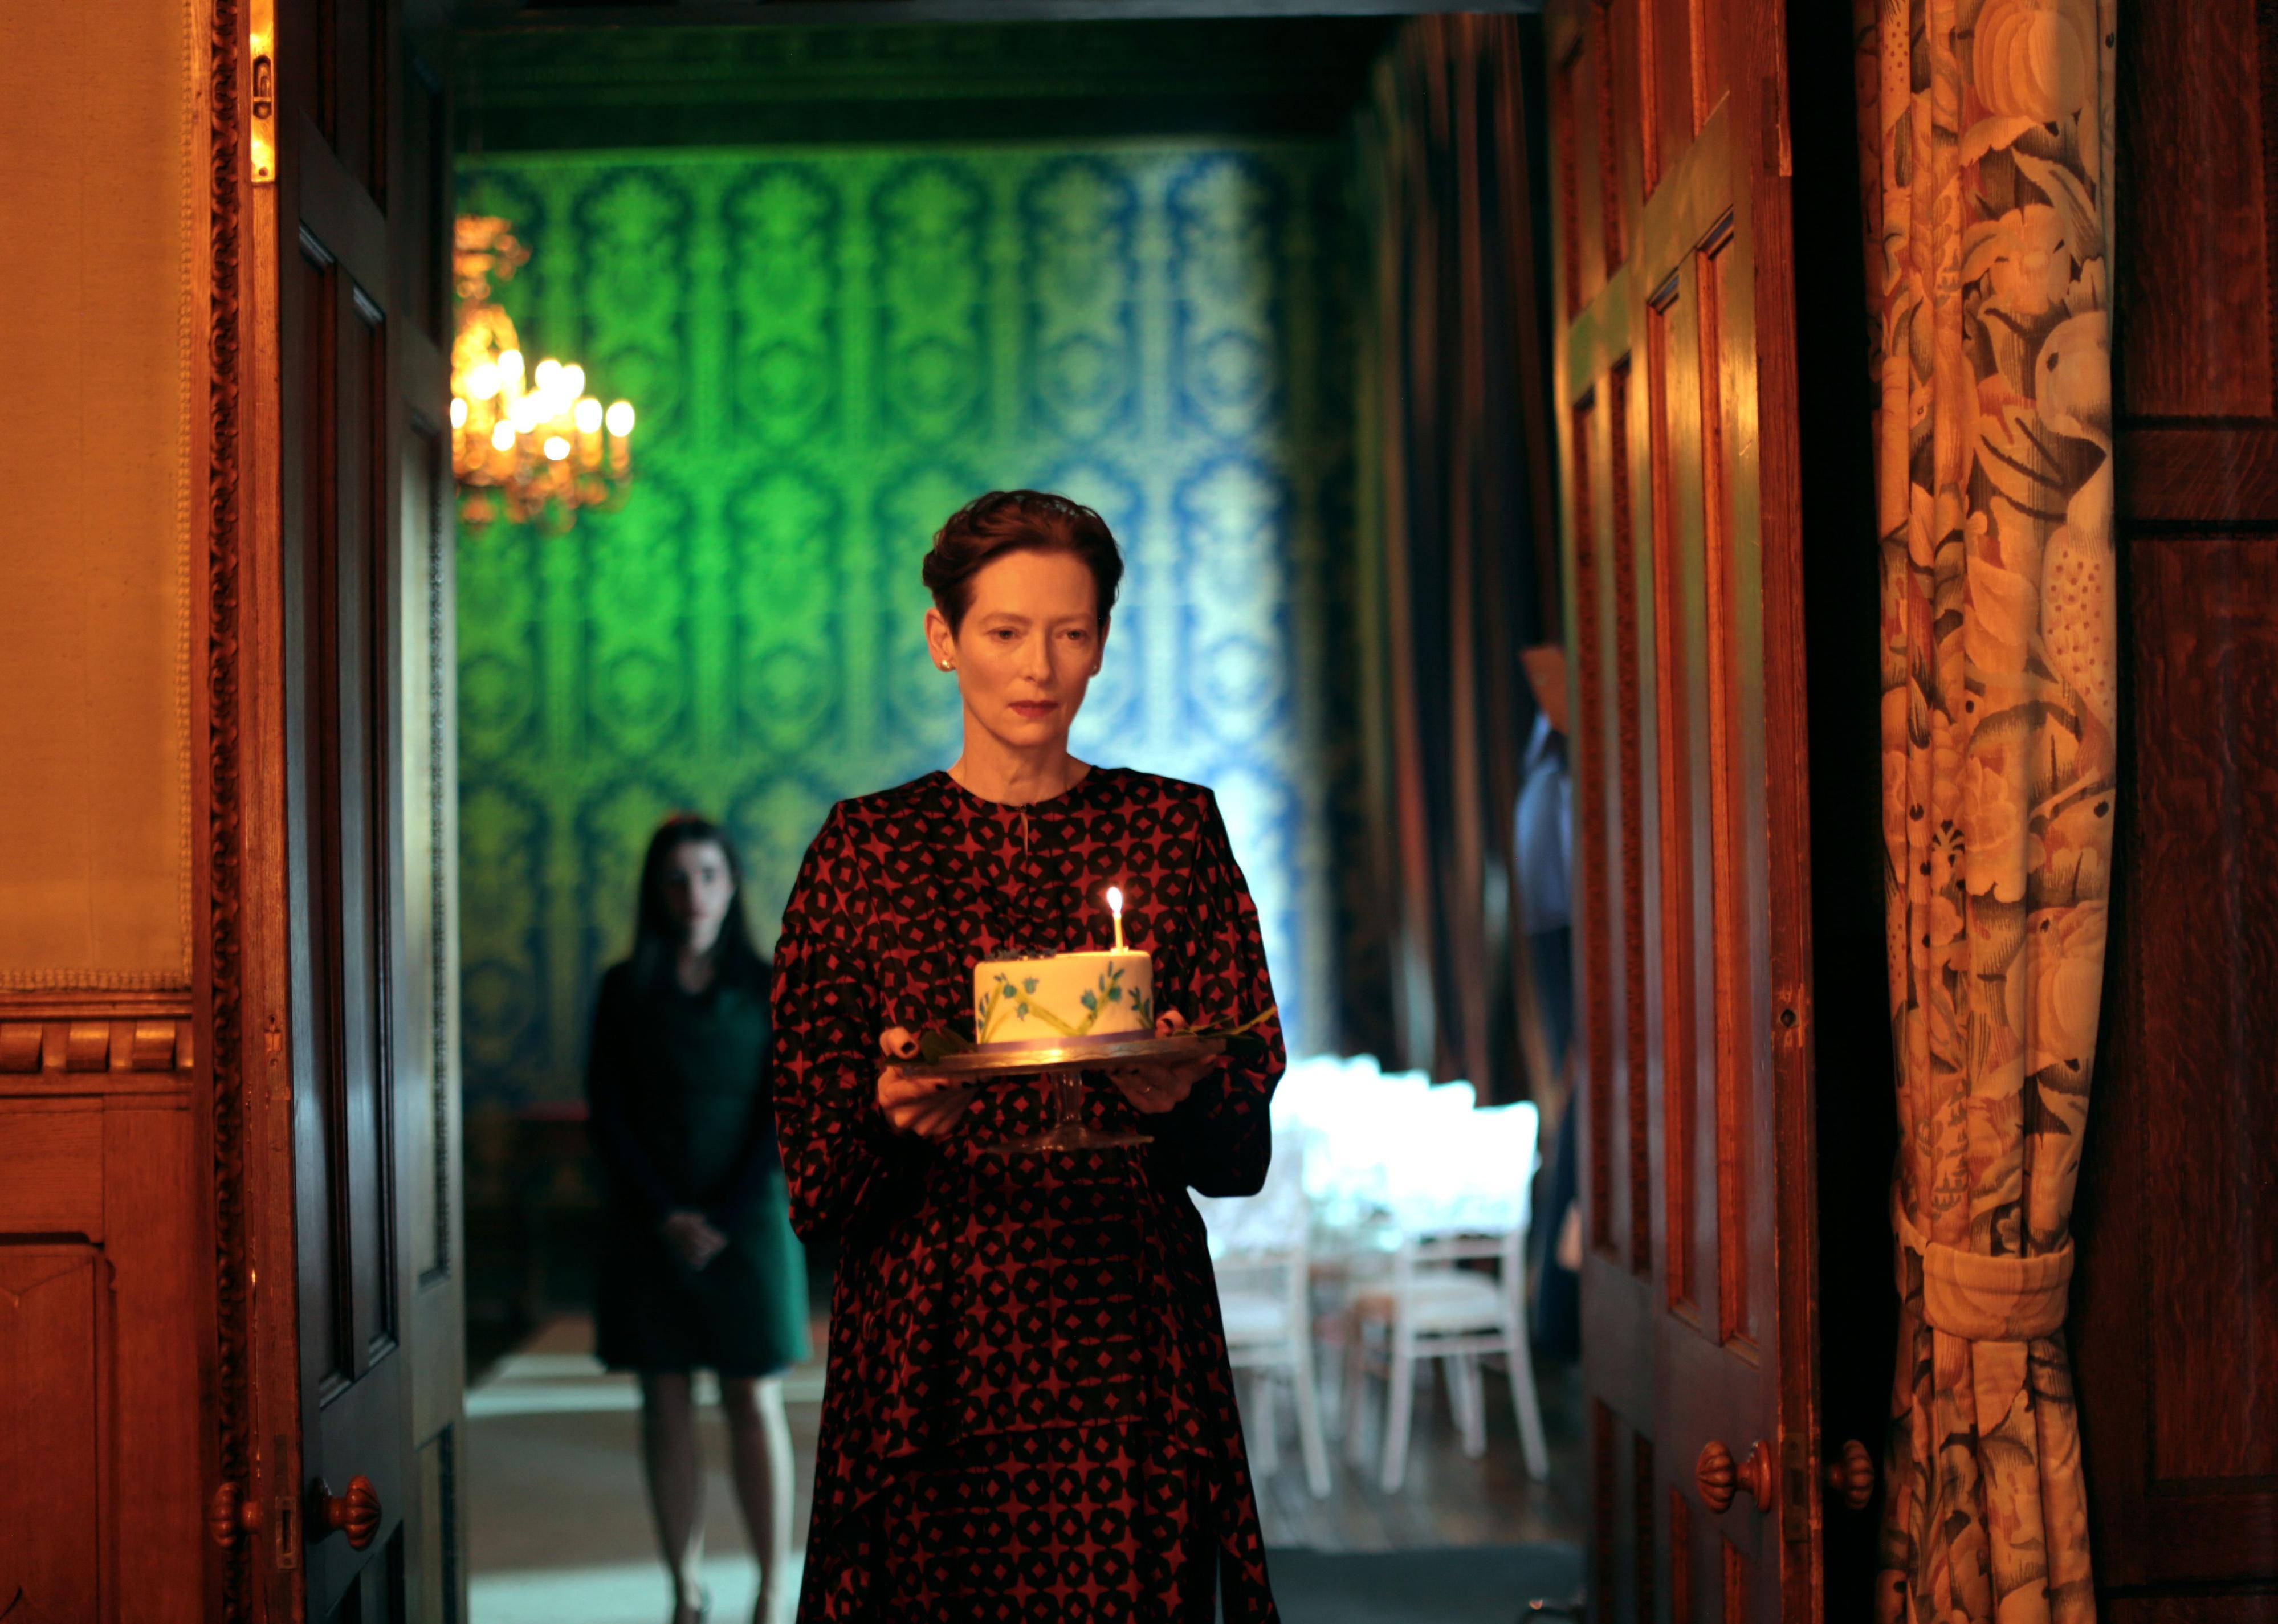 Tilda Swinton carrying a cake with one lit candle down an ornate historic looking hallway.